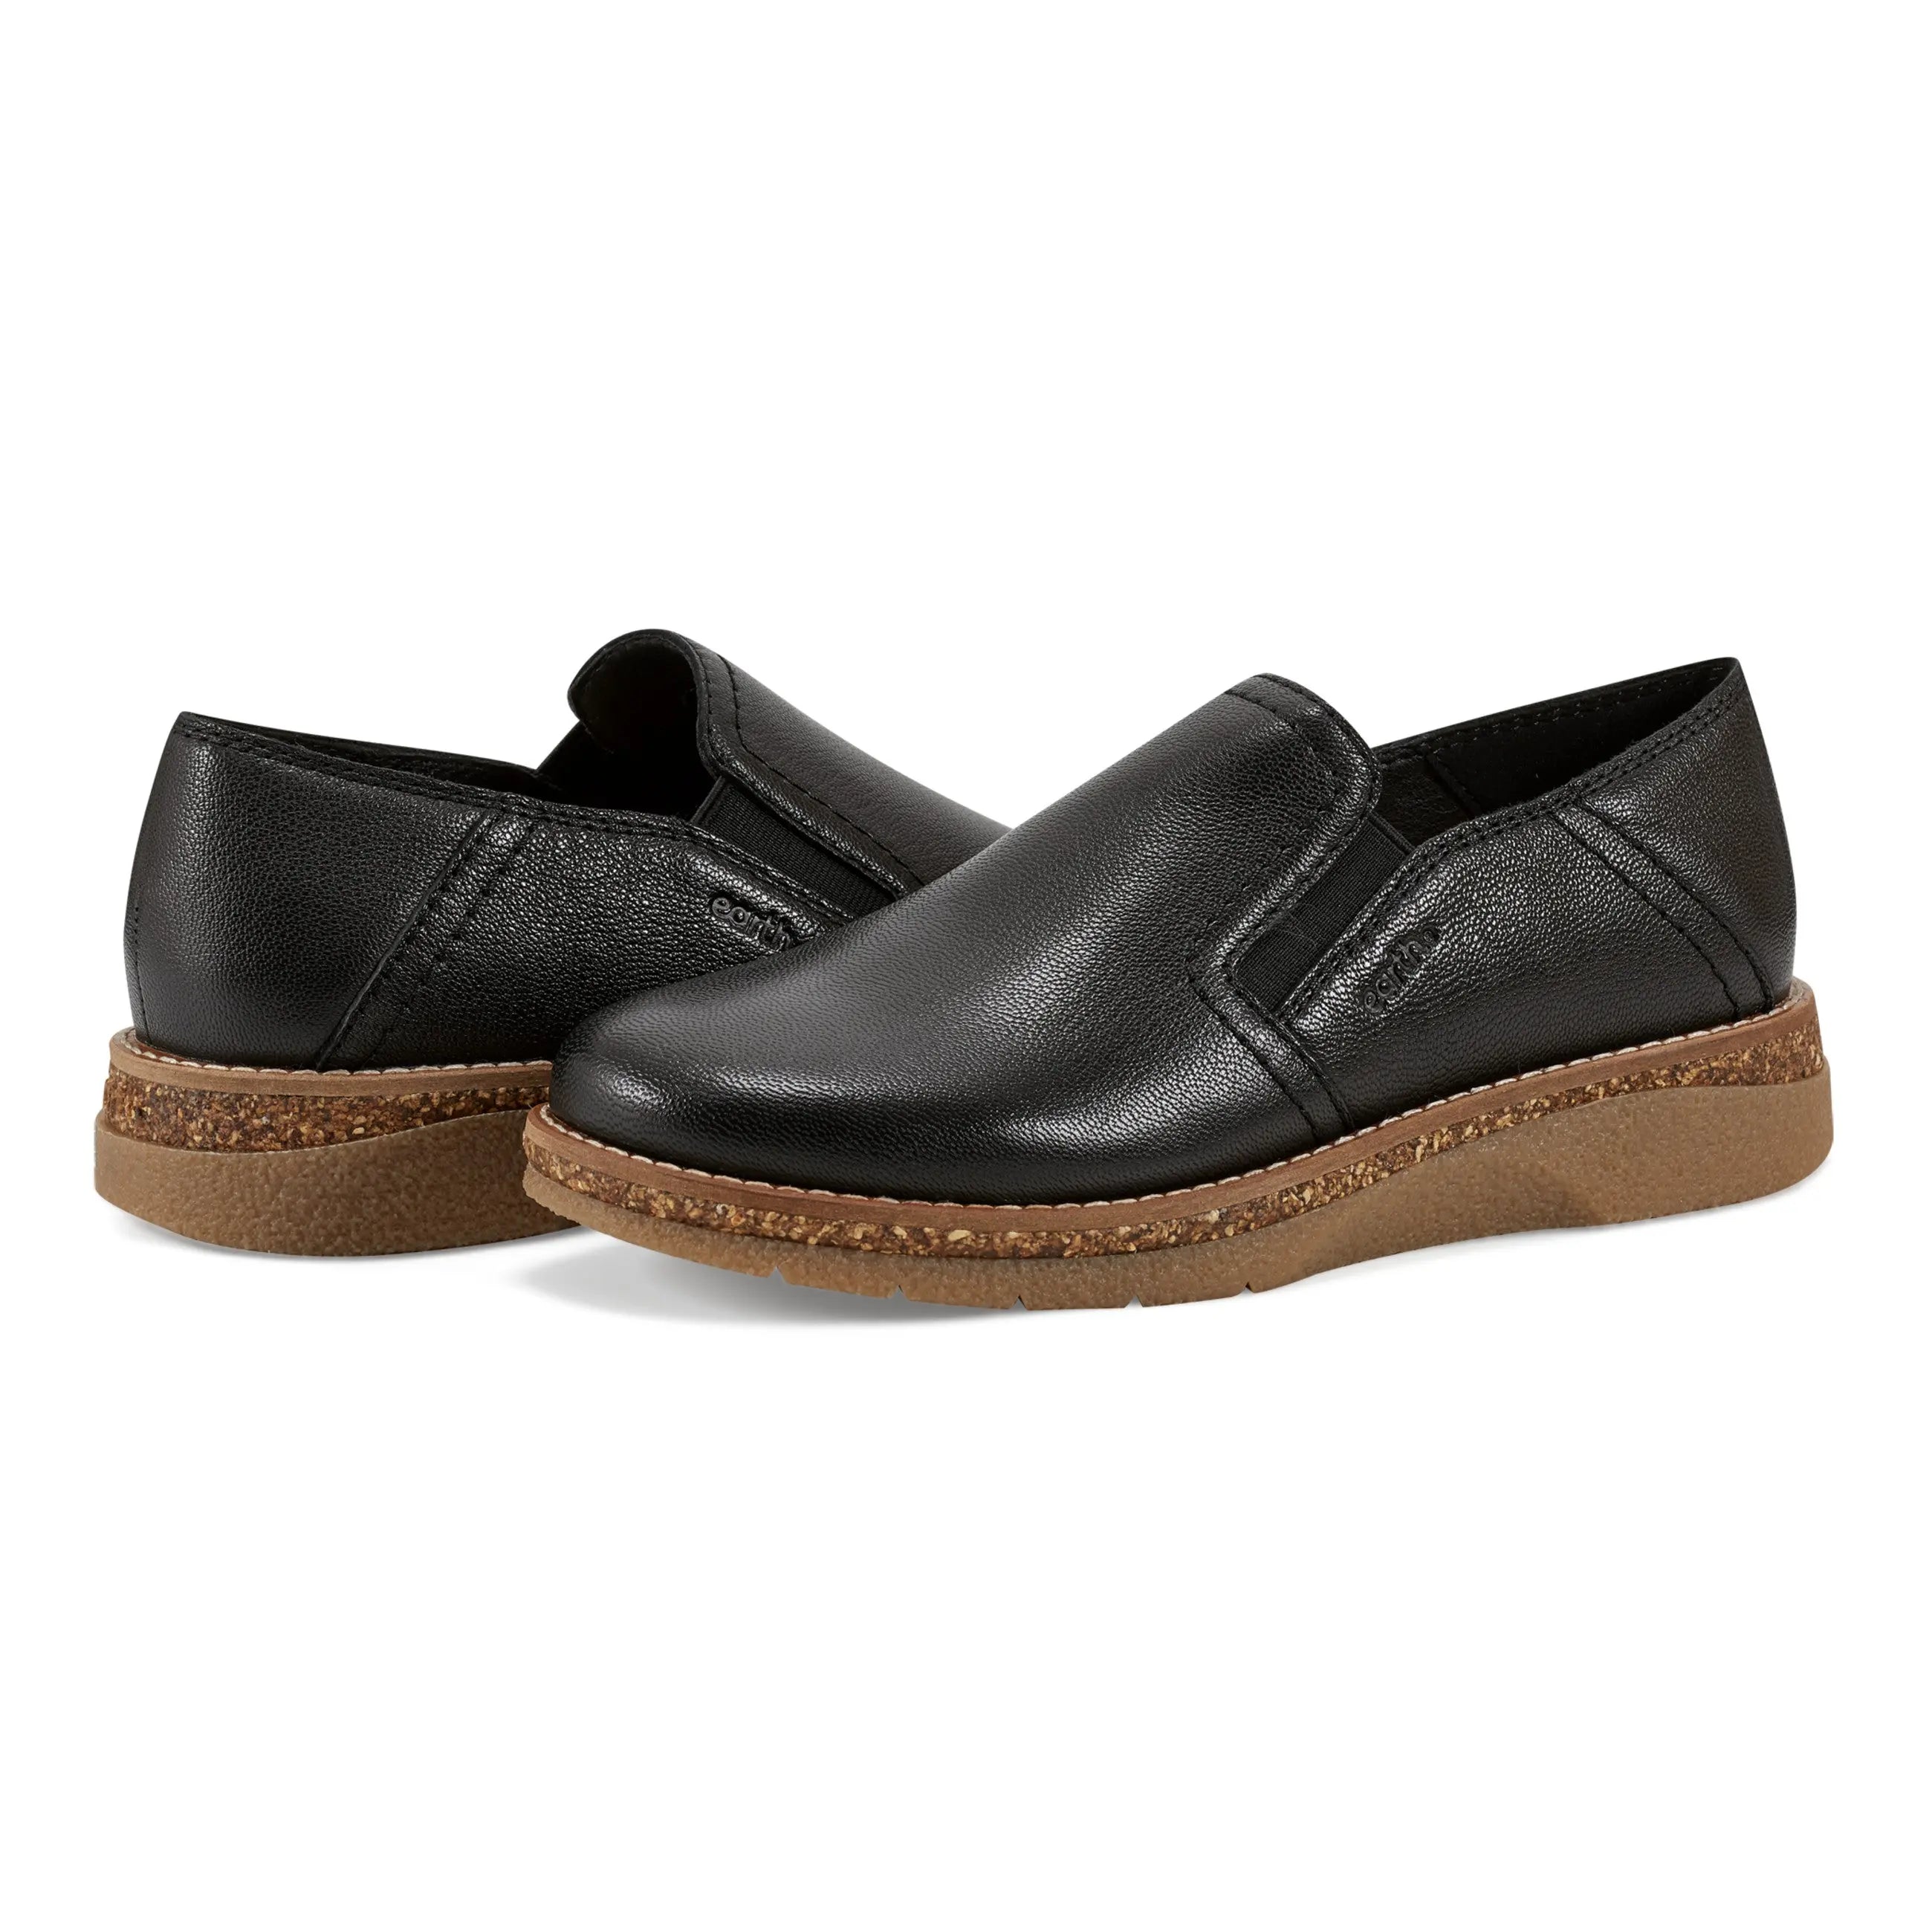 Pria Round Toe Slip-on Casual Flat Loafers